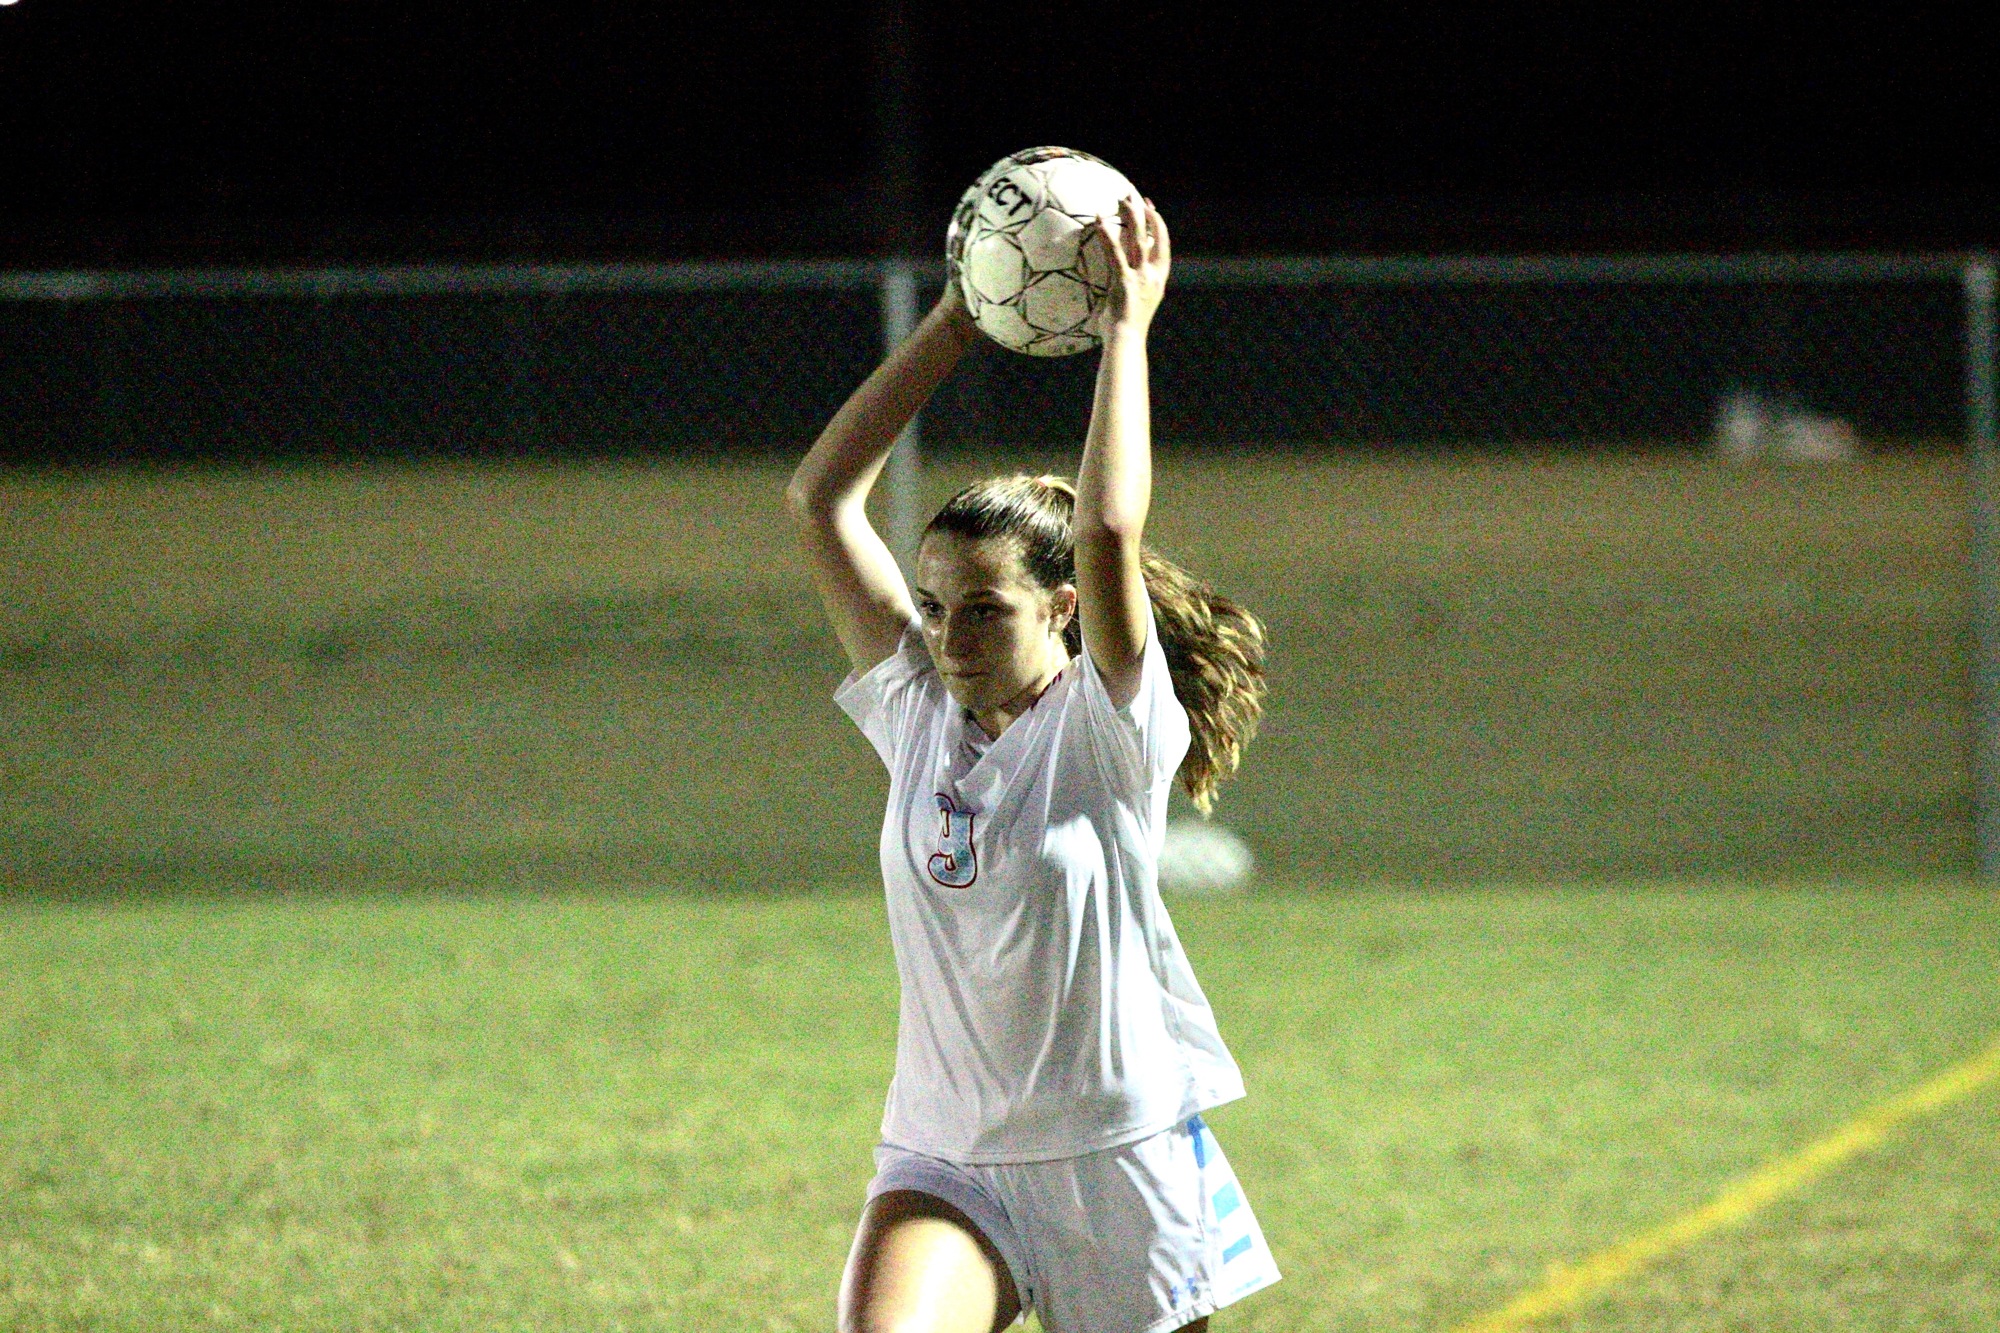 Seabreeze's Ericka Dane throws the ball in against Spruce Creek. File Photo